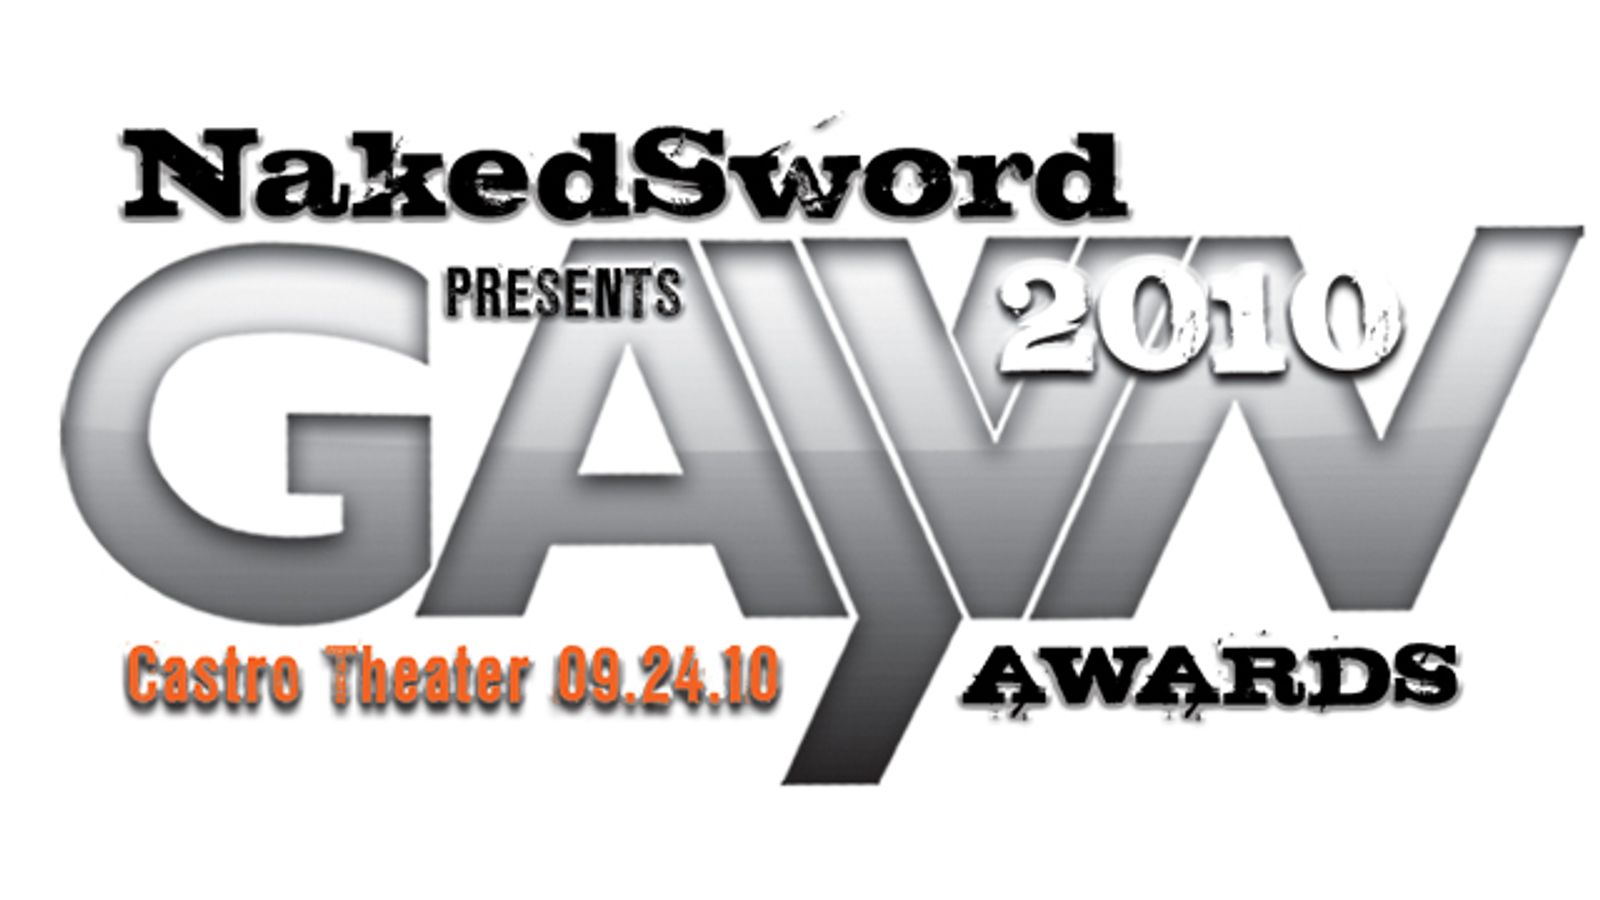 Calling All Personalities: The GAYVN Awards Want You!